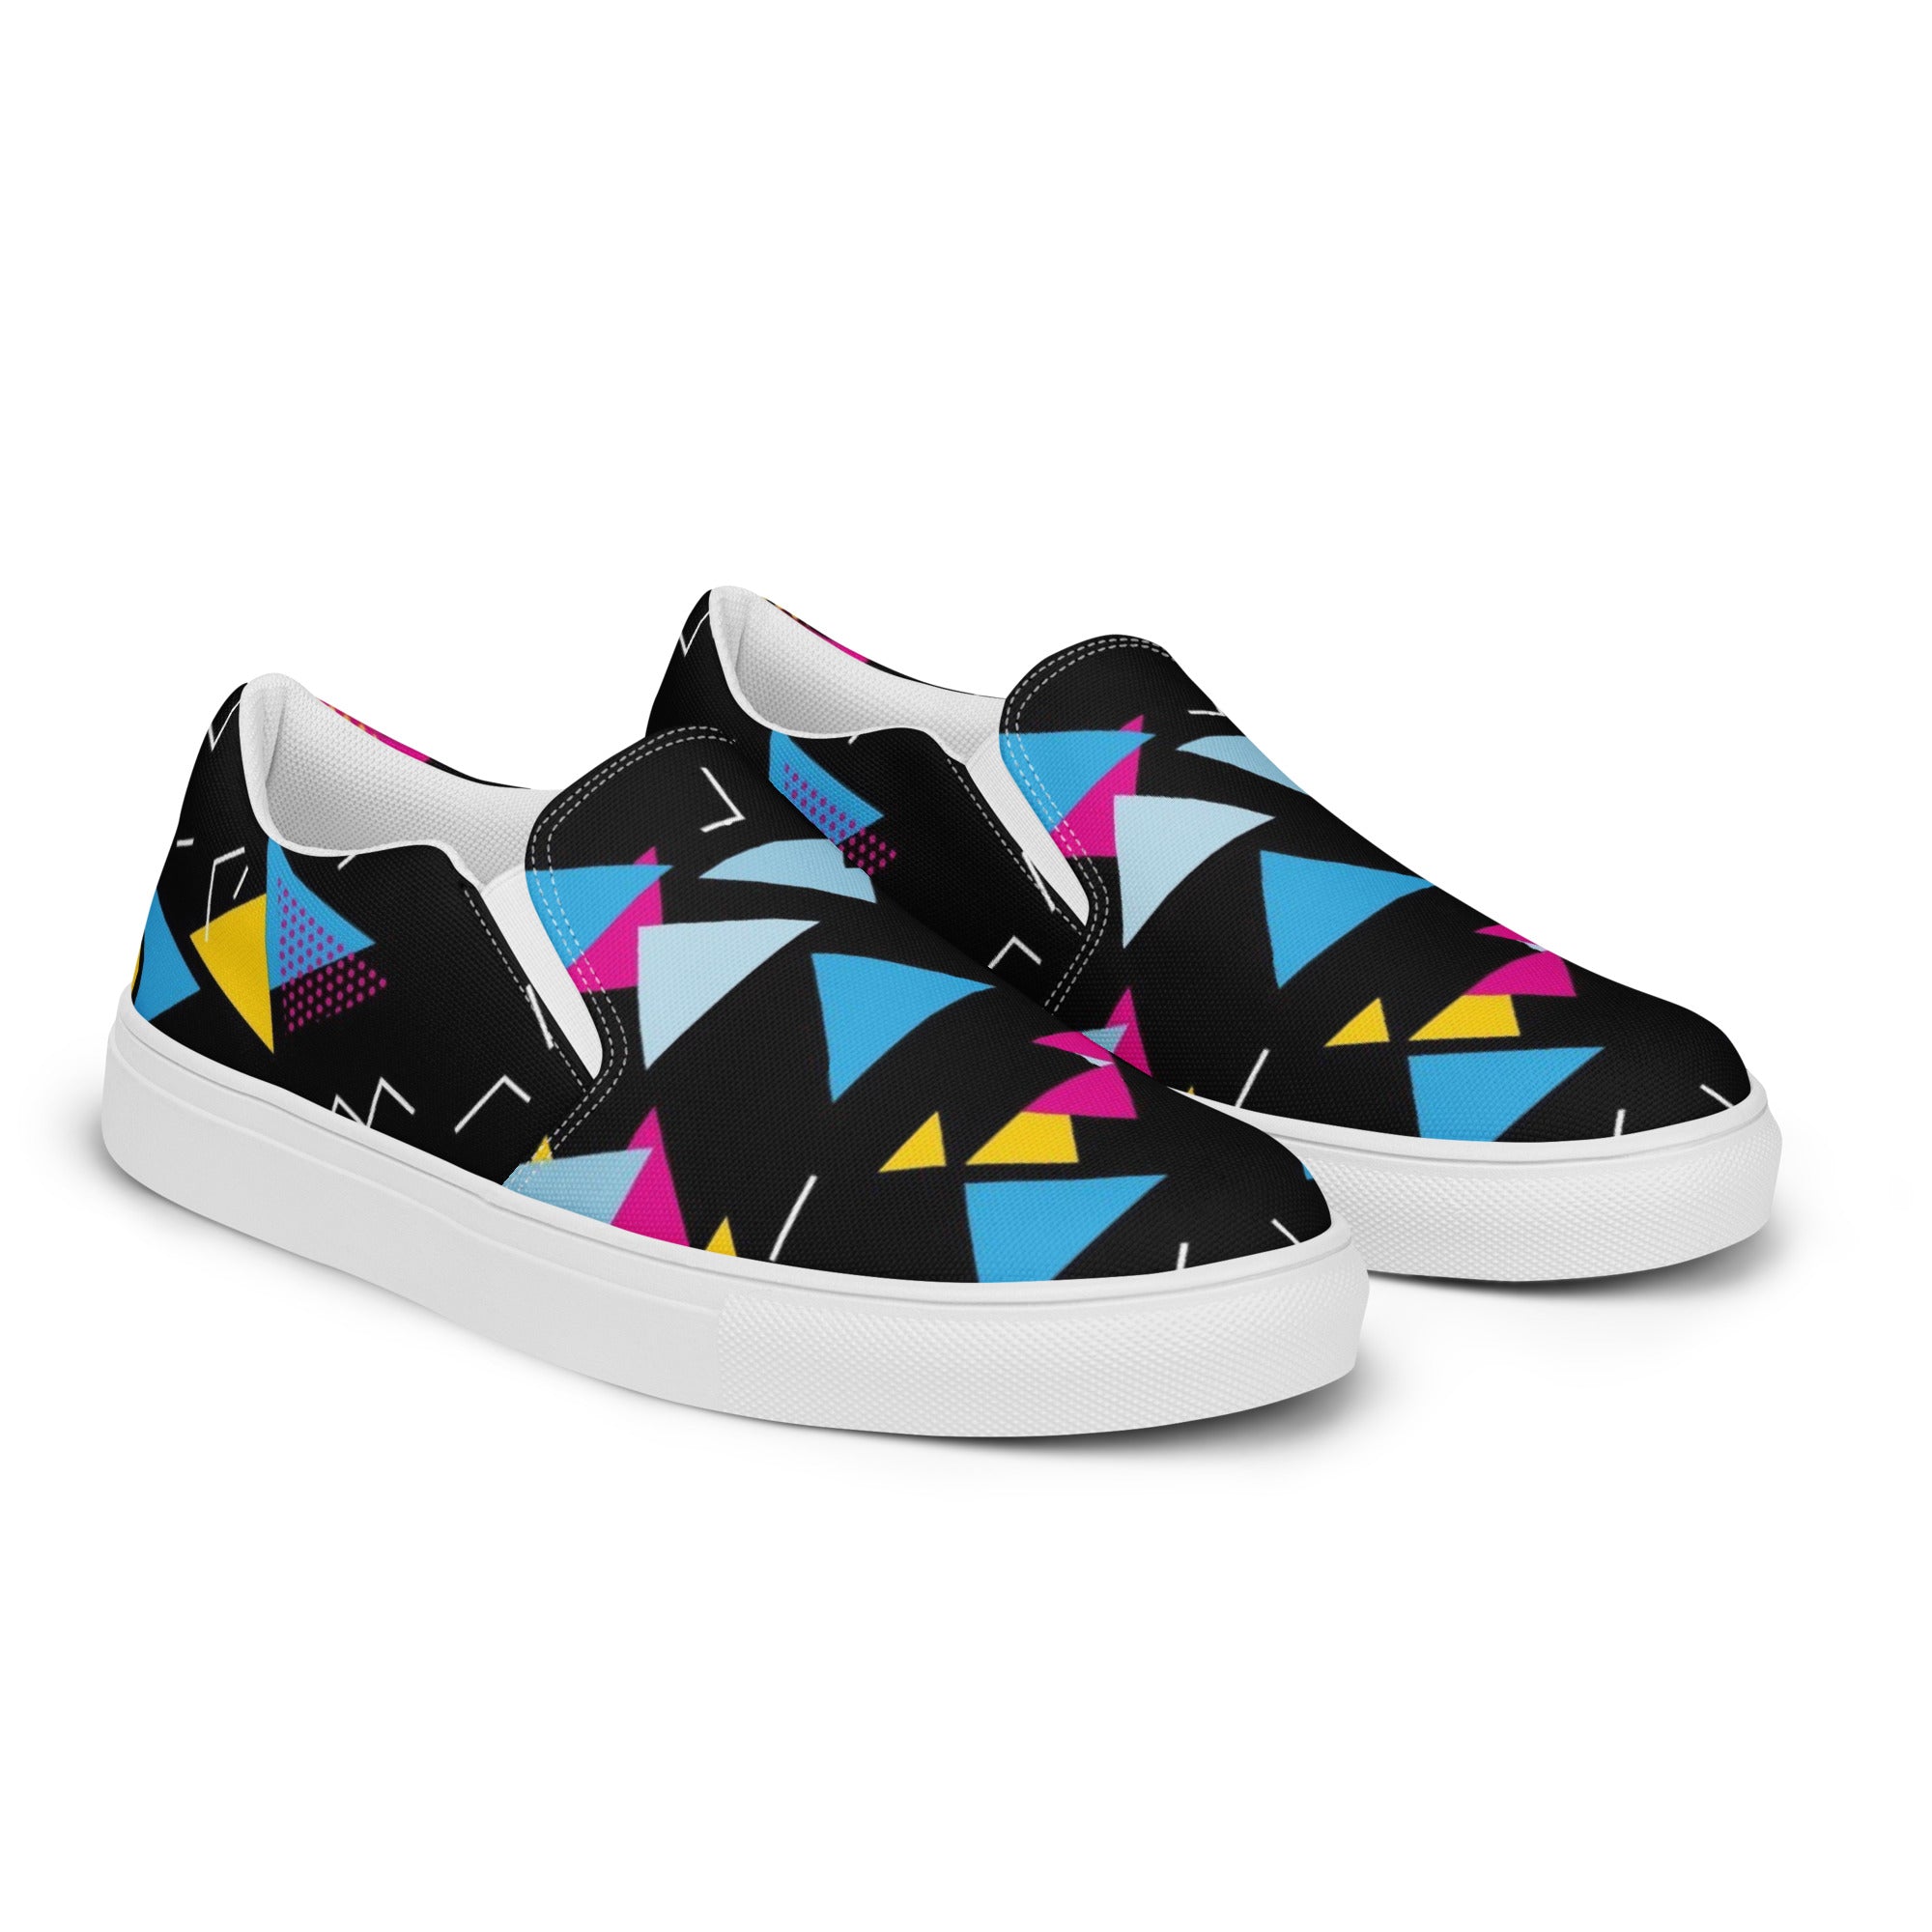 Rad Palm Saved By The Bell Women’s Slip-On Canvas Shoes